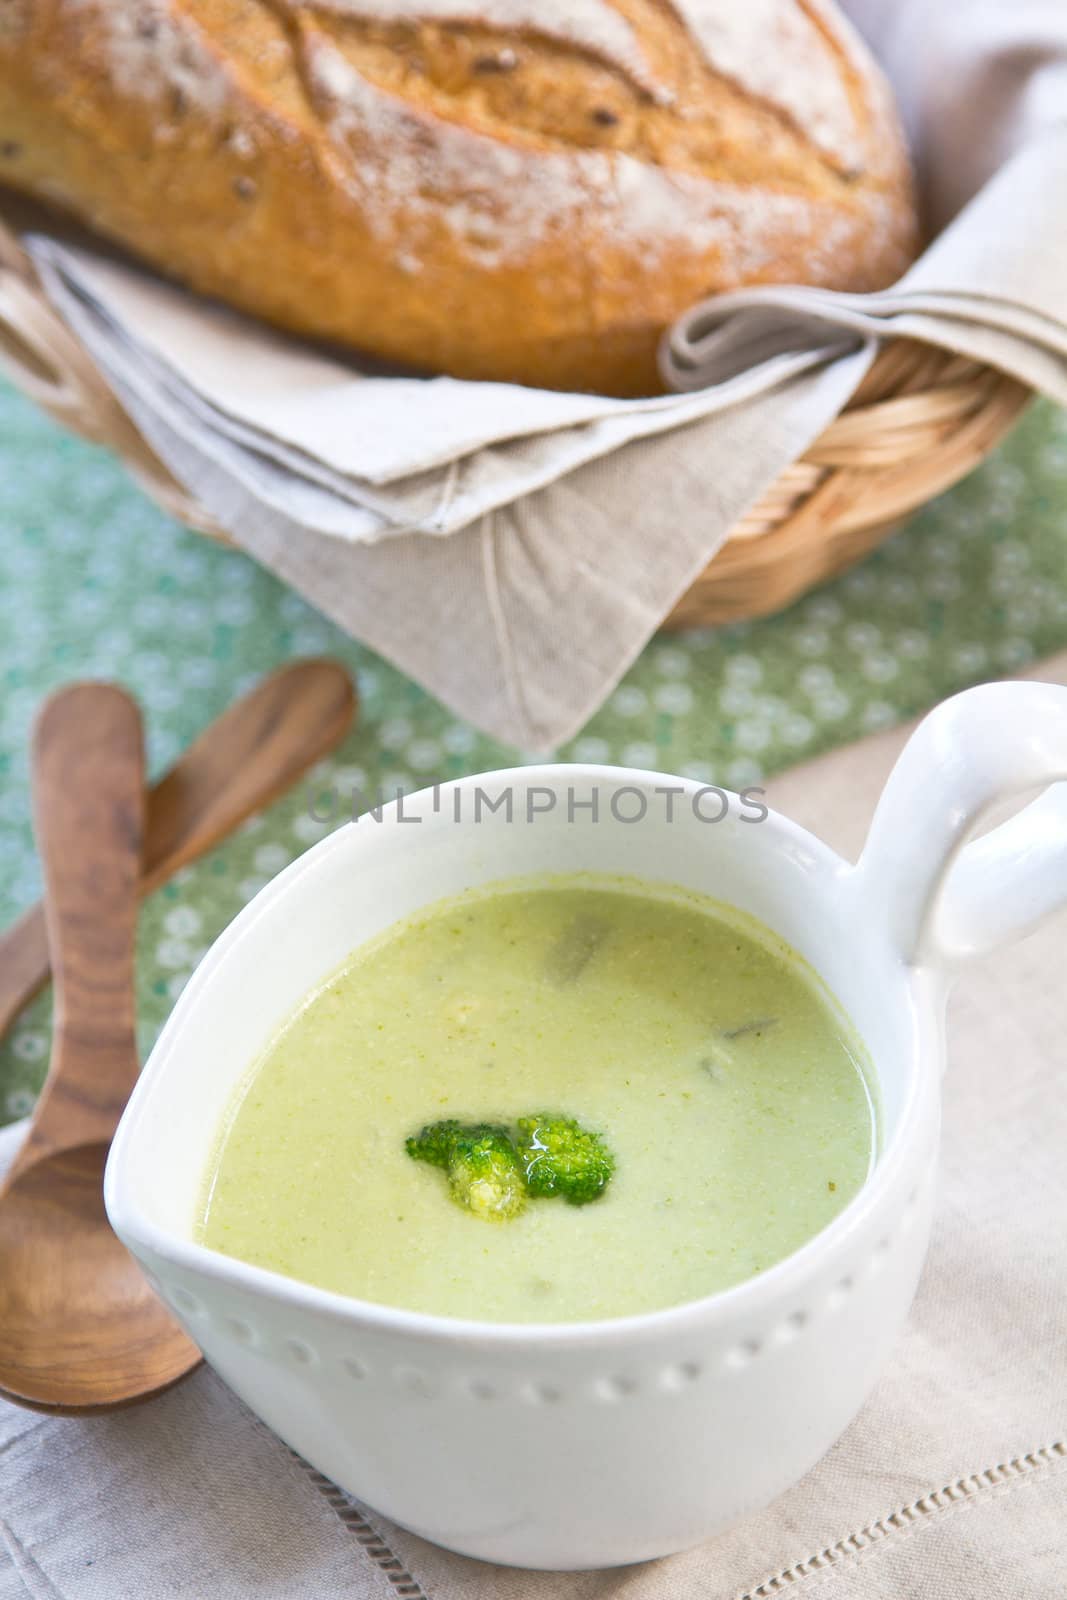 Broccoli soup by a loaf of wholemeal bread